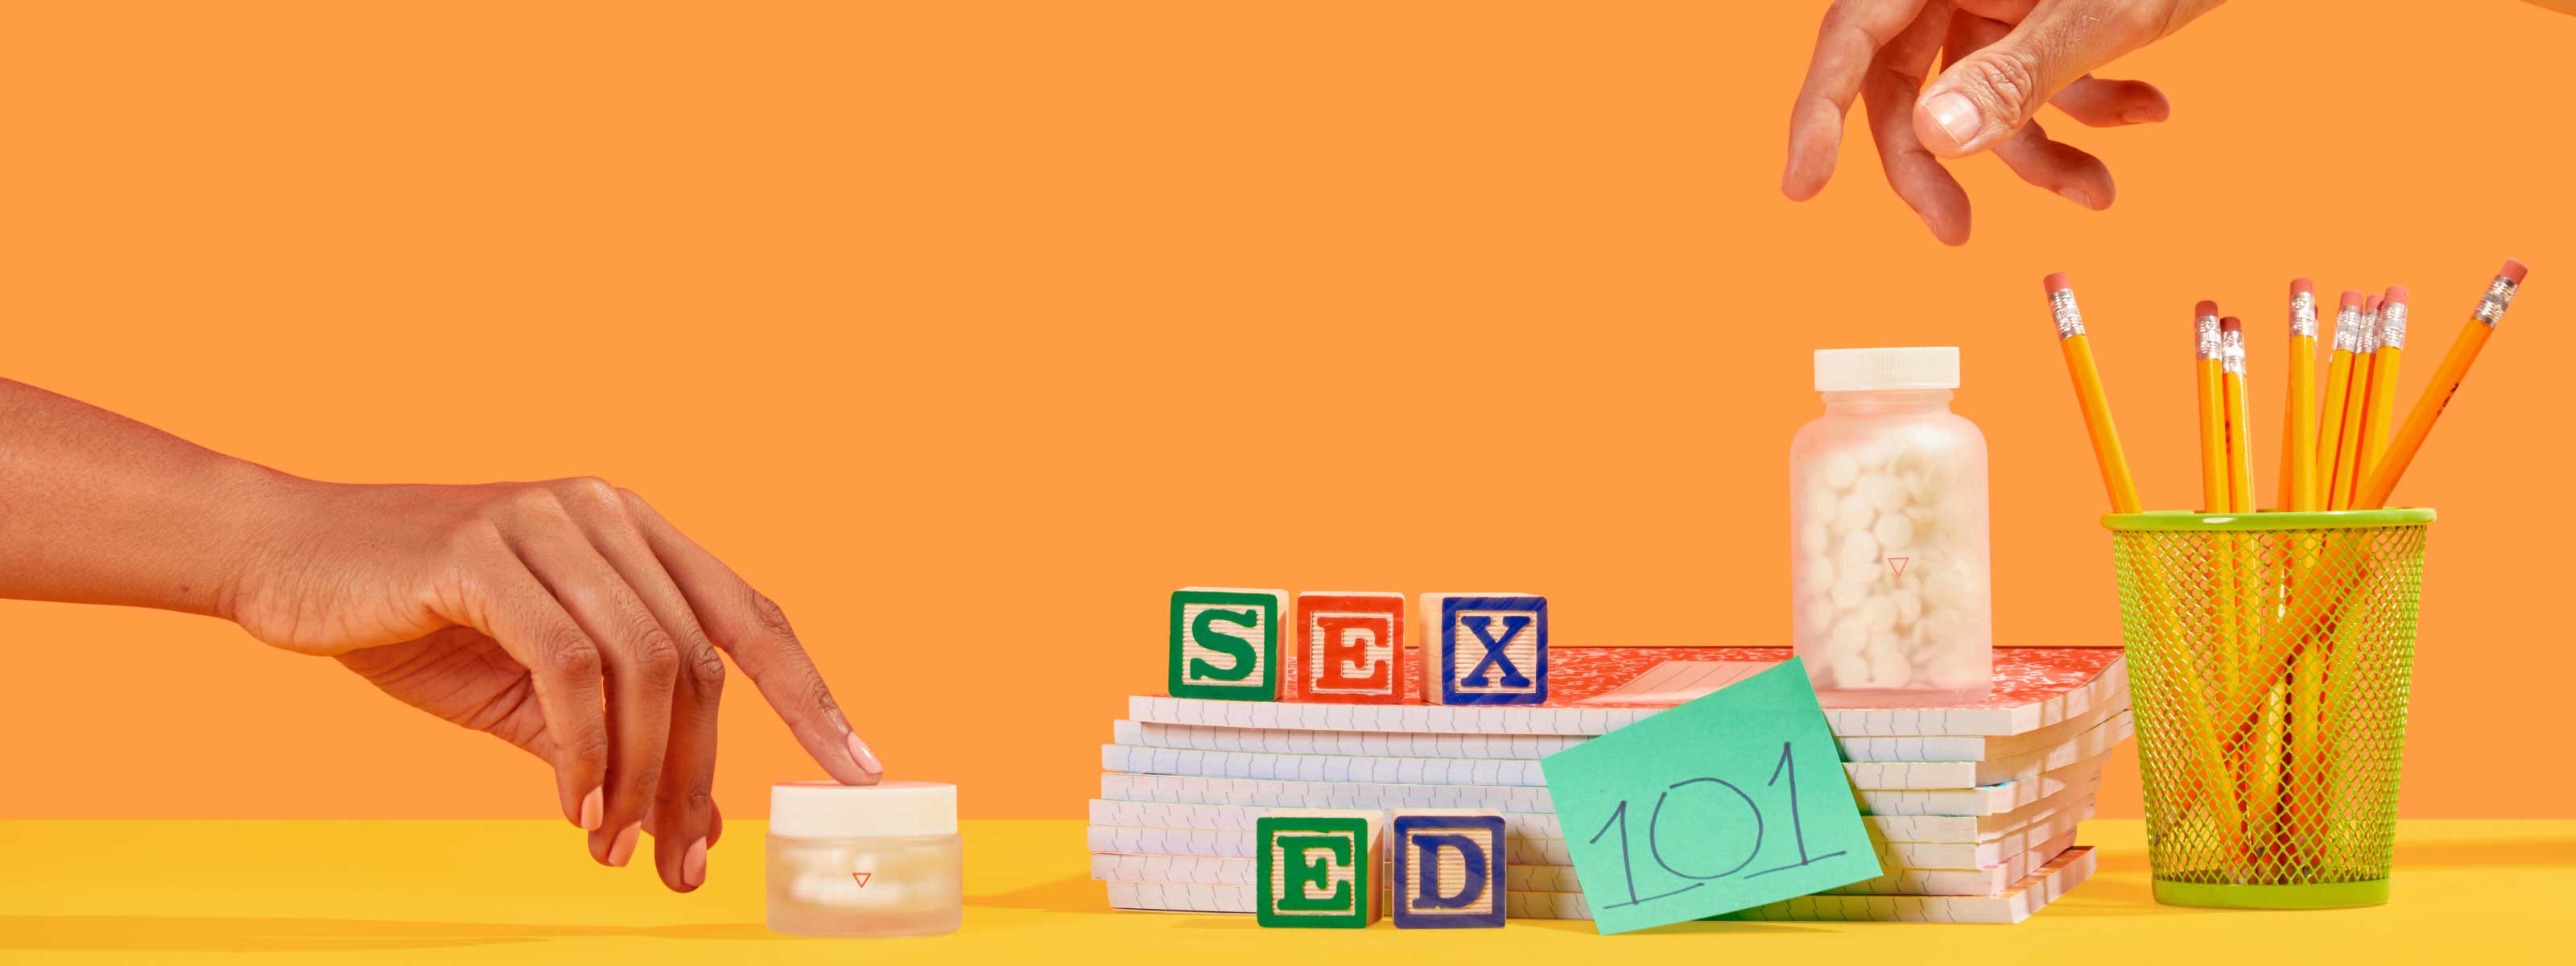 Desktop scene with Wisp medication, pencils and Sex Ed 101 spelled out with building blocks